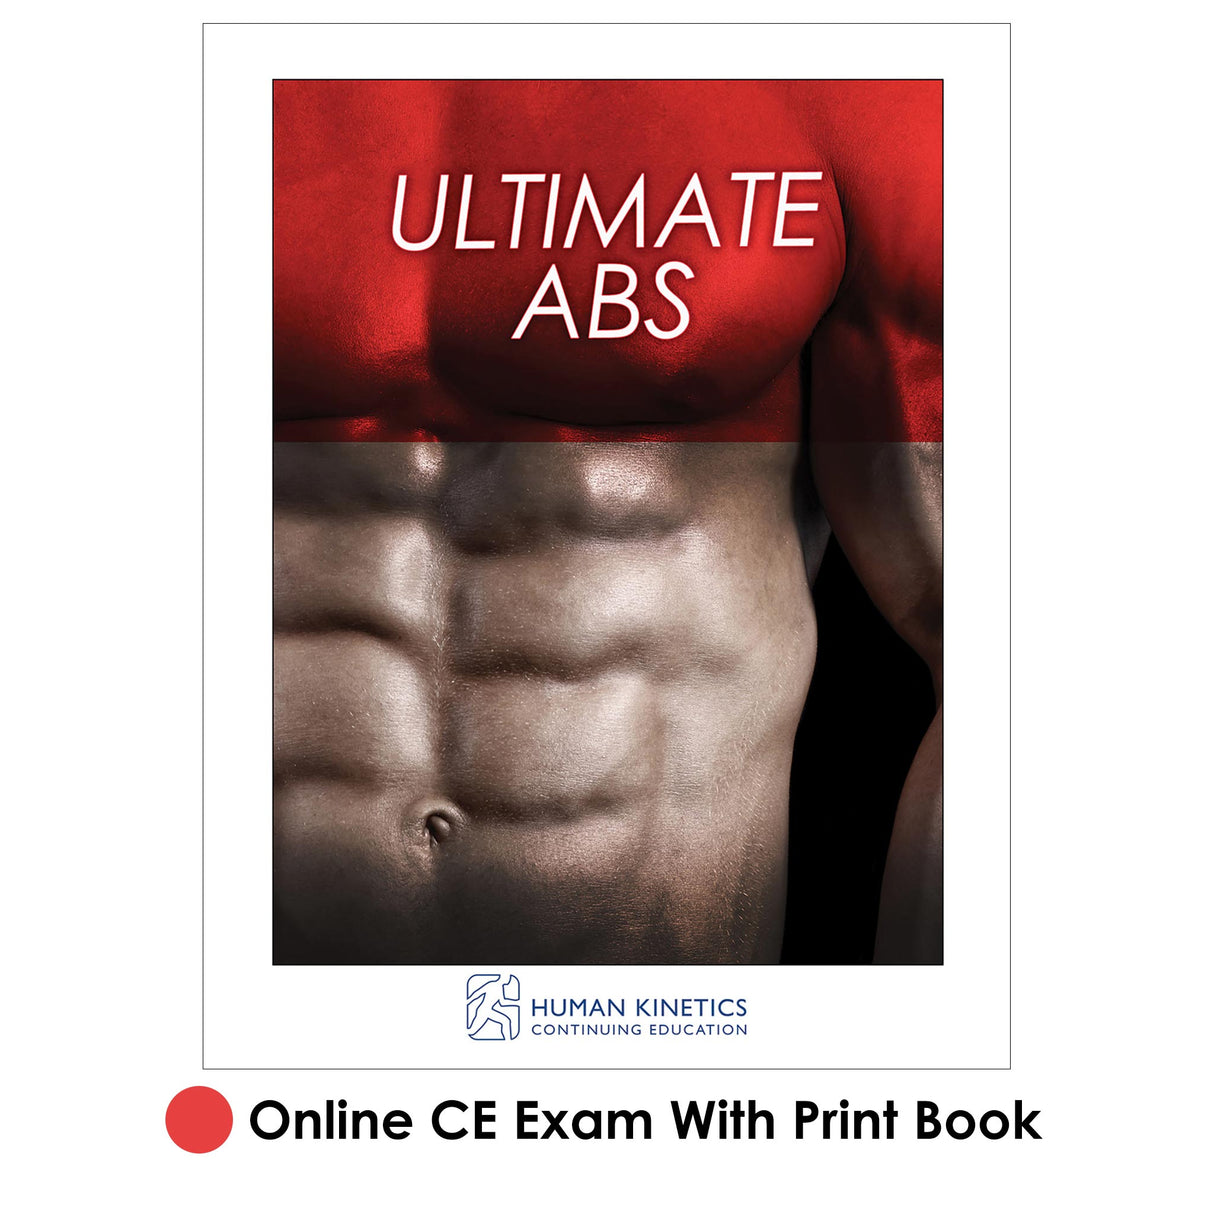 Ultimate Abs Online CE Exam With Print Book